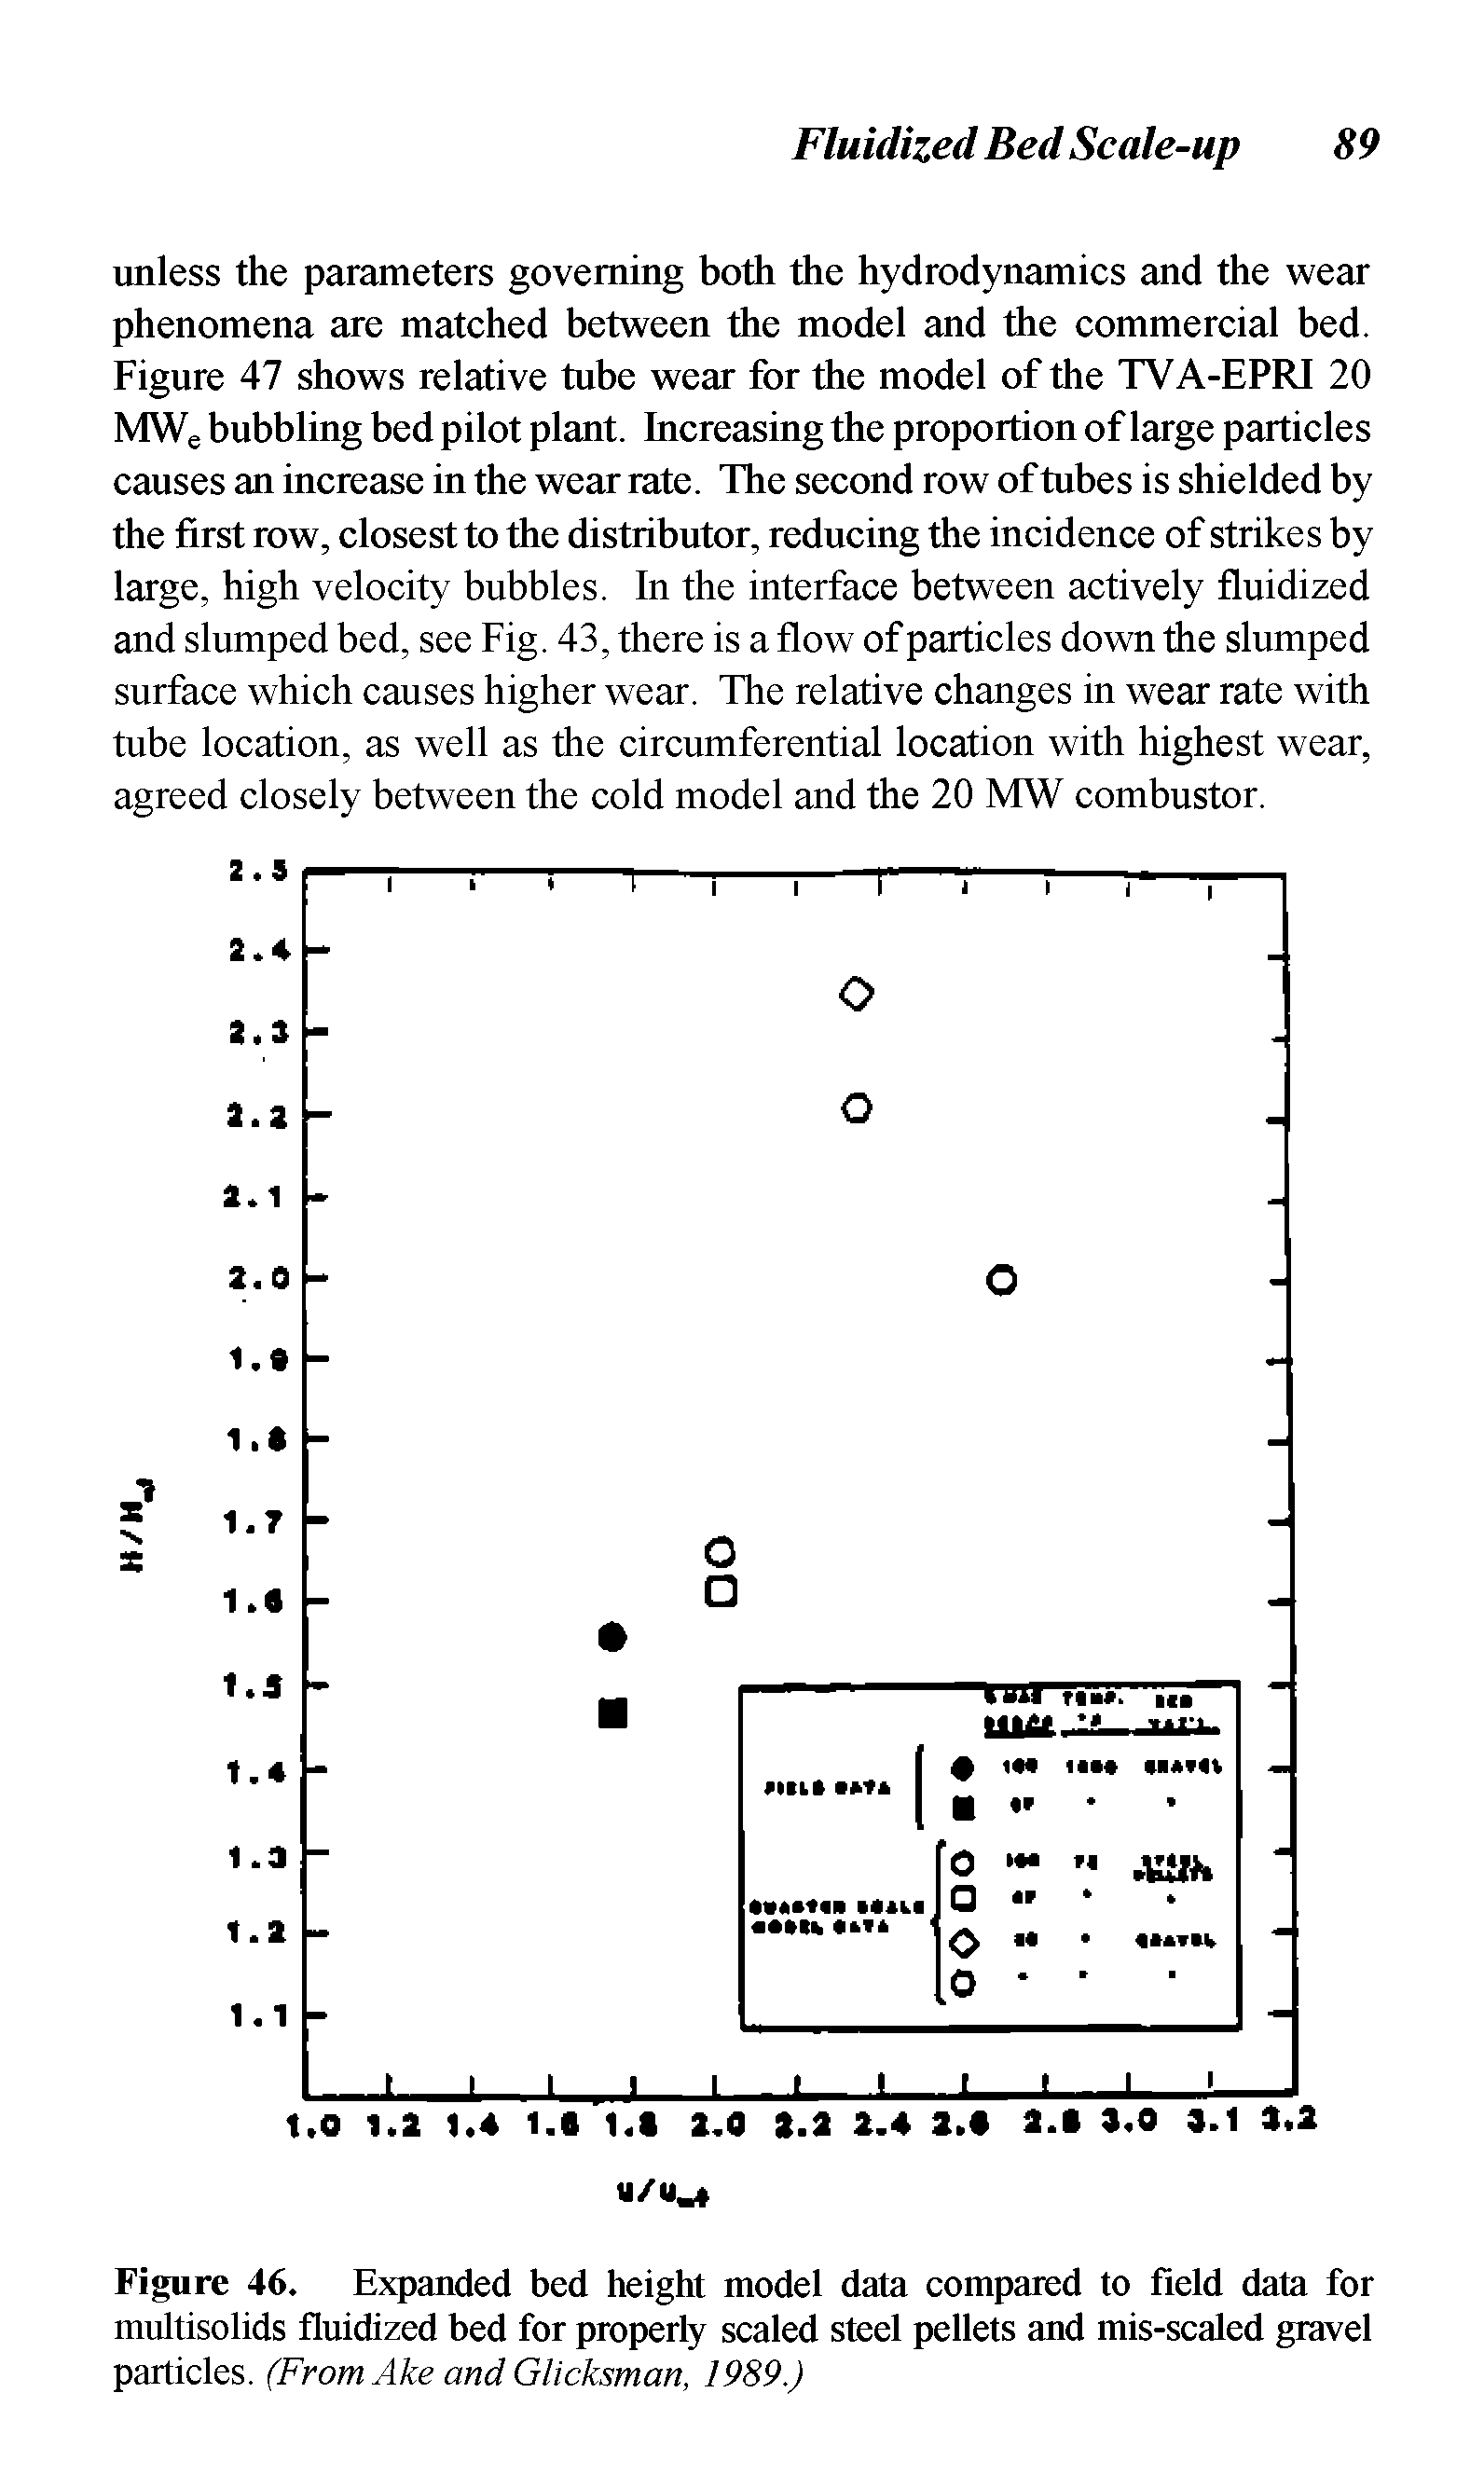 Figure 46. Expanded bed height model data compared to field data for multisolids fluidized bed for properly scaled steel pellets and mis-scaled gravel particles. (From Ake and Glicksman, 1989.)...